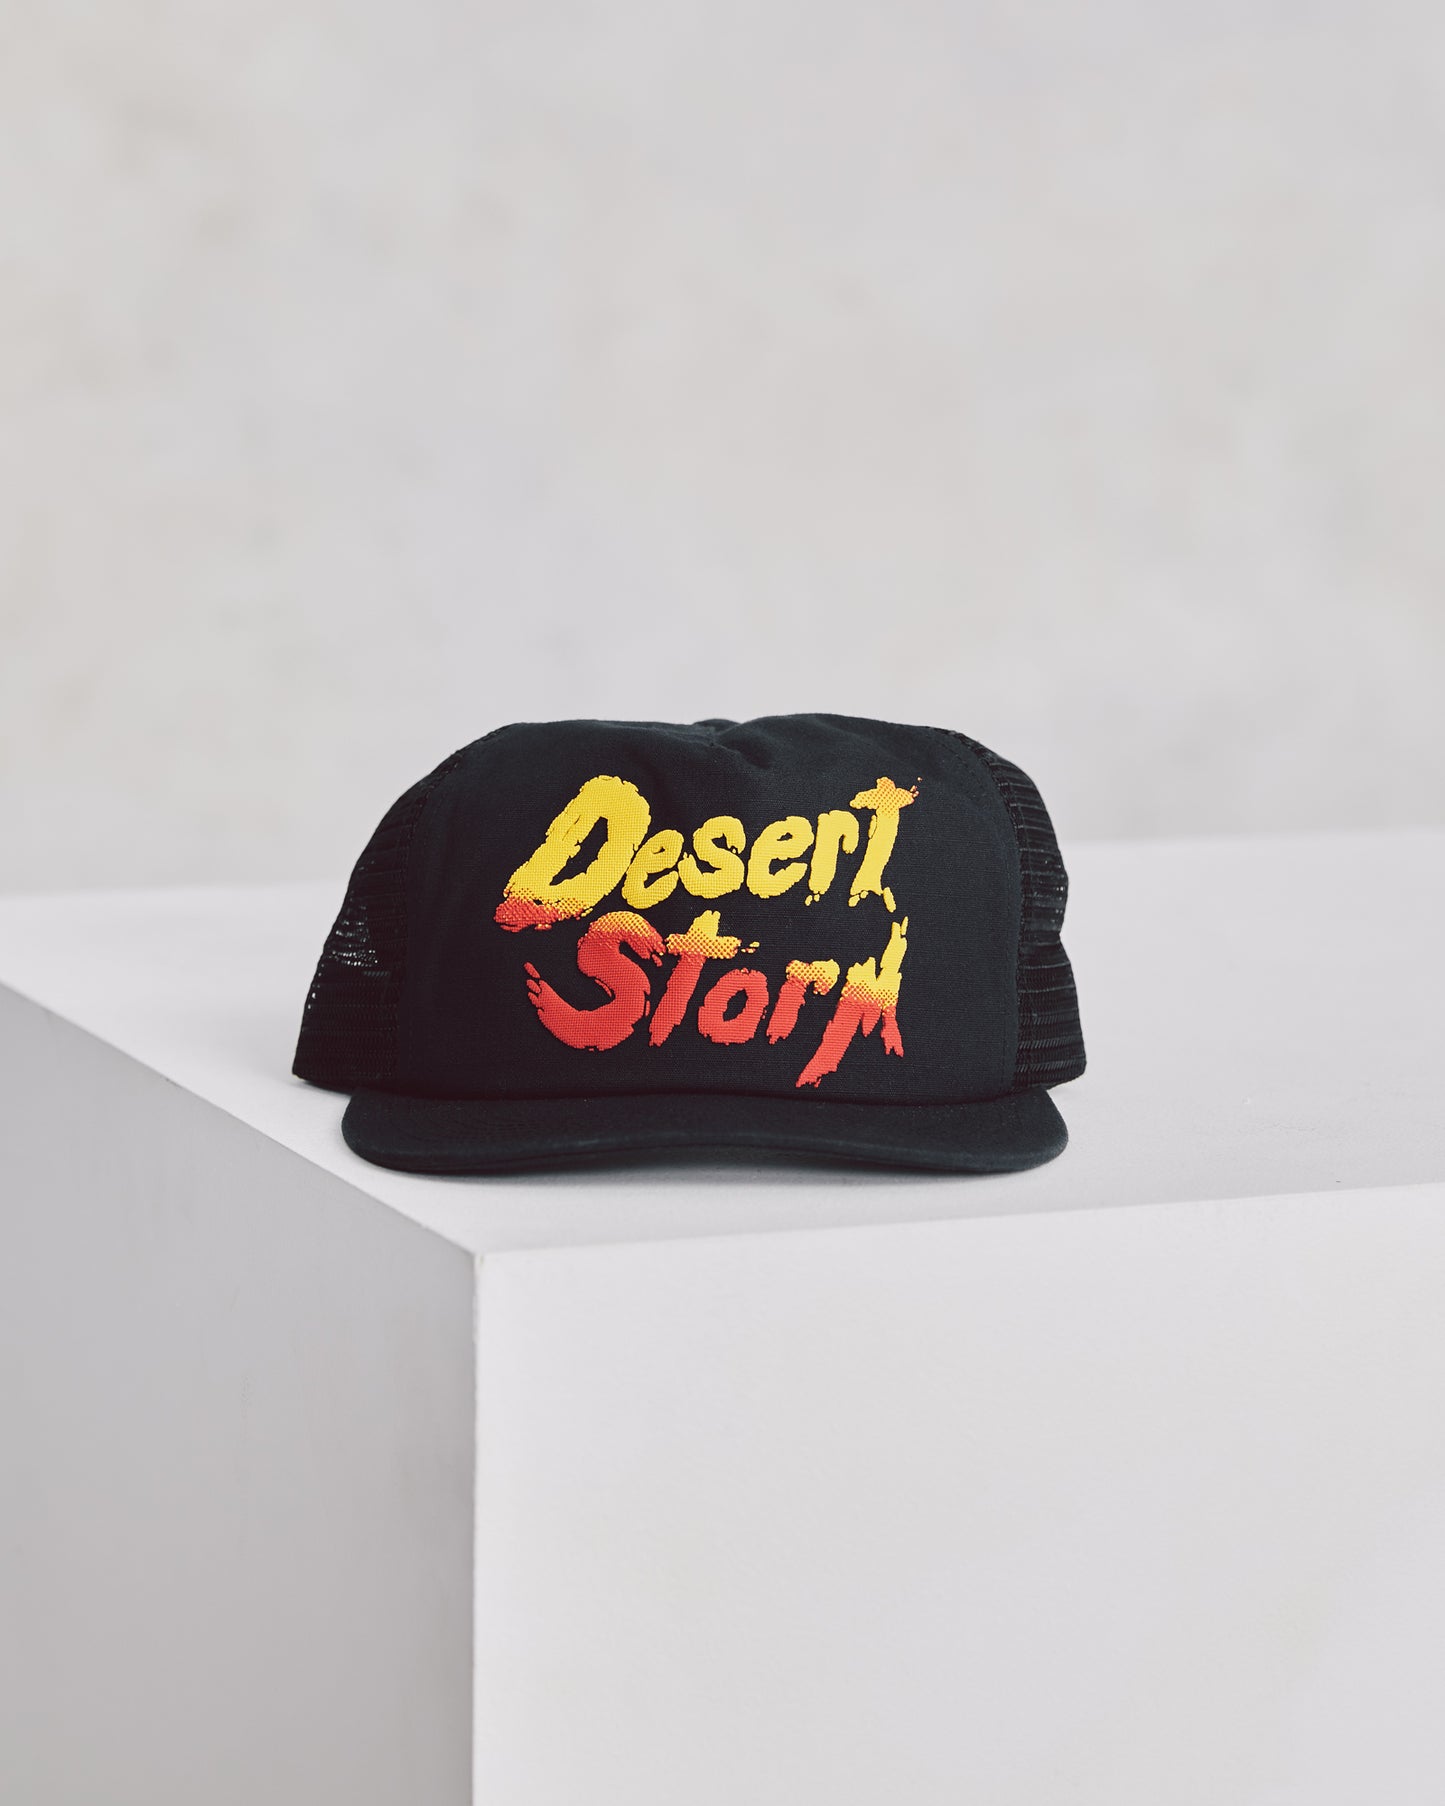 Black Supreme Trucker Hat with Red and Yellow Desert Storm Graphic